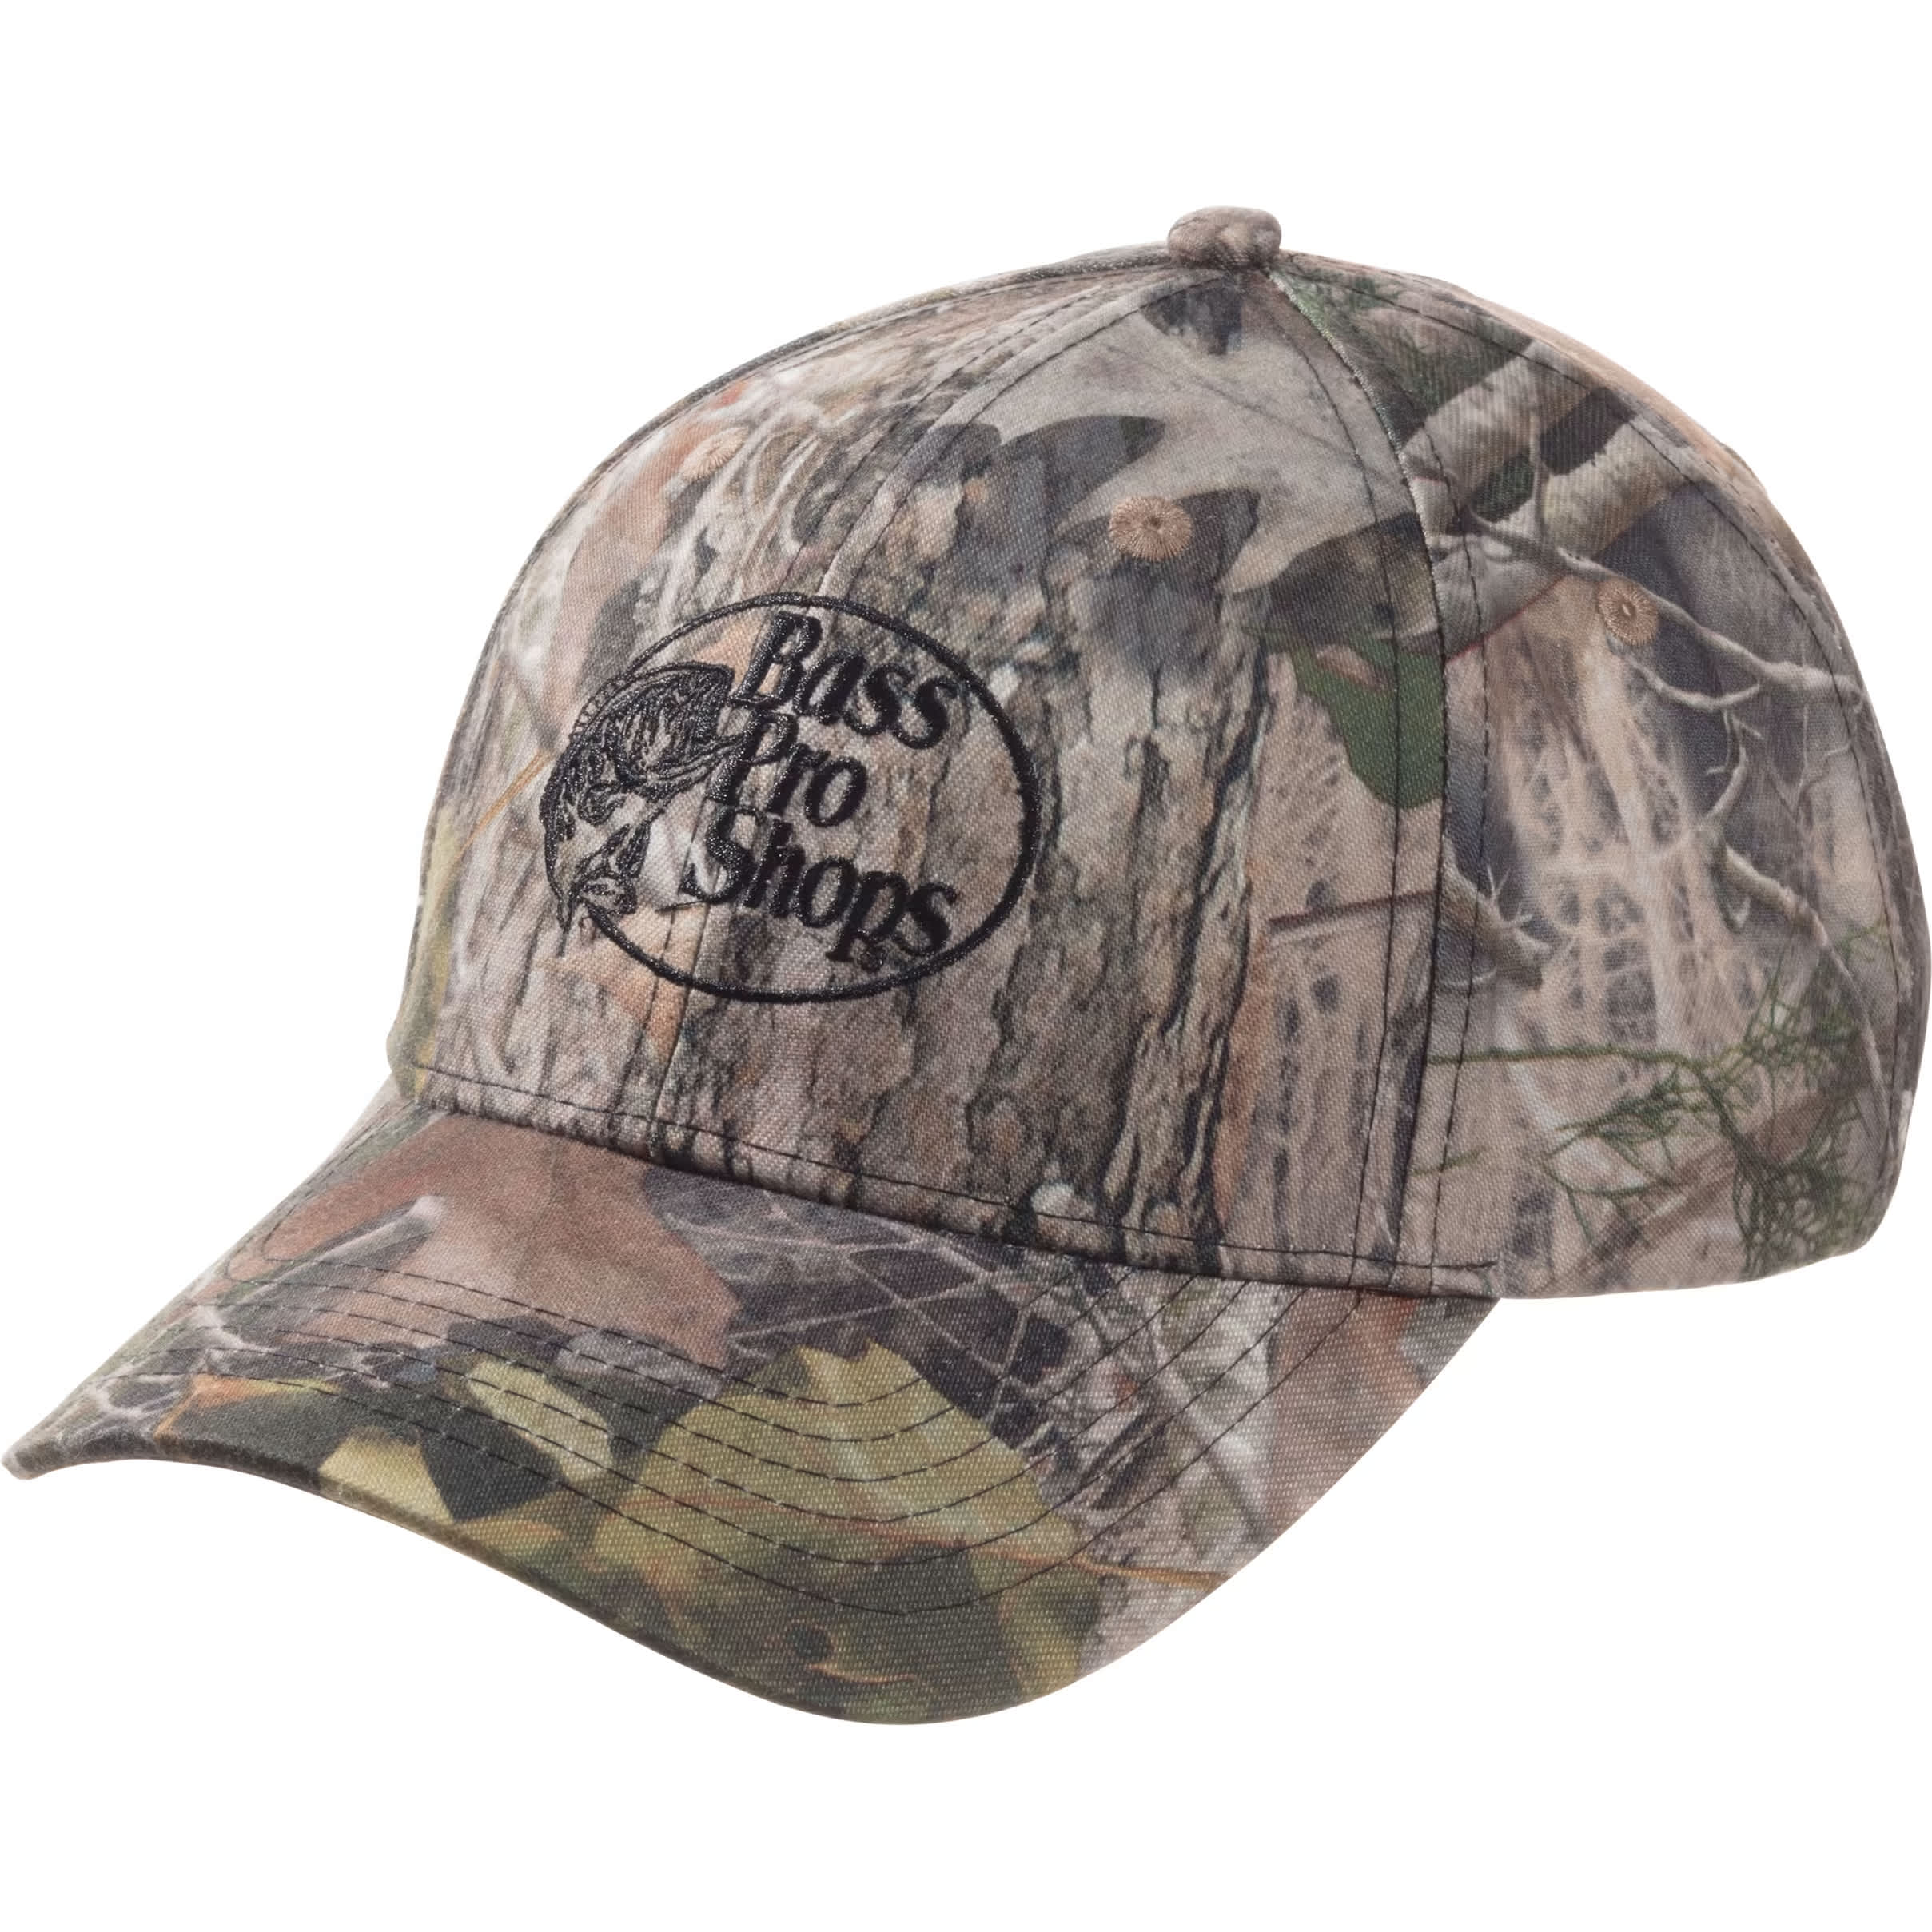 Bass Pro Shops Hat Mens Gone Hunting DEER Patch Camouflage